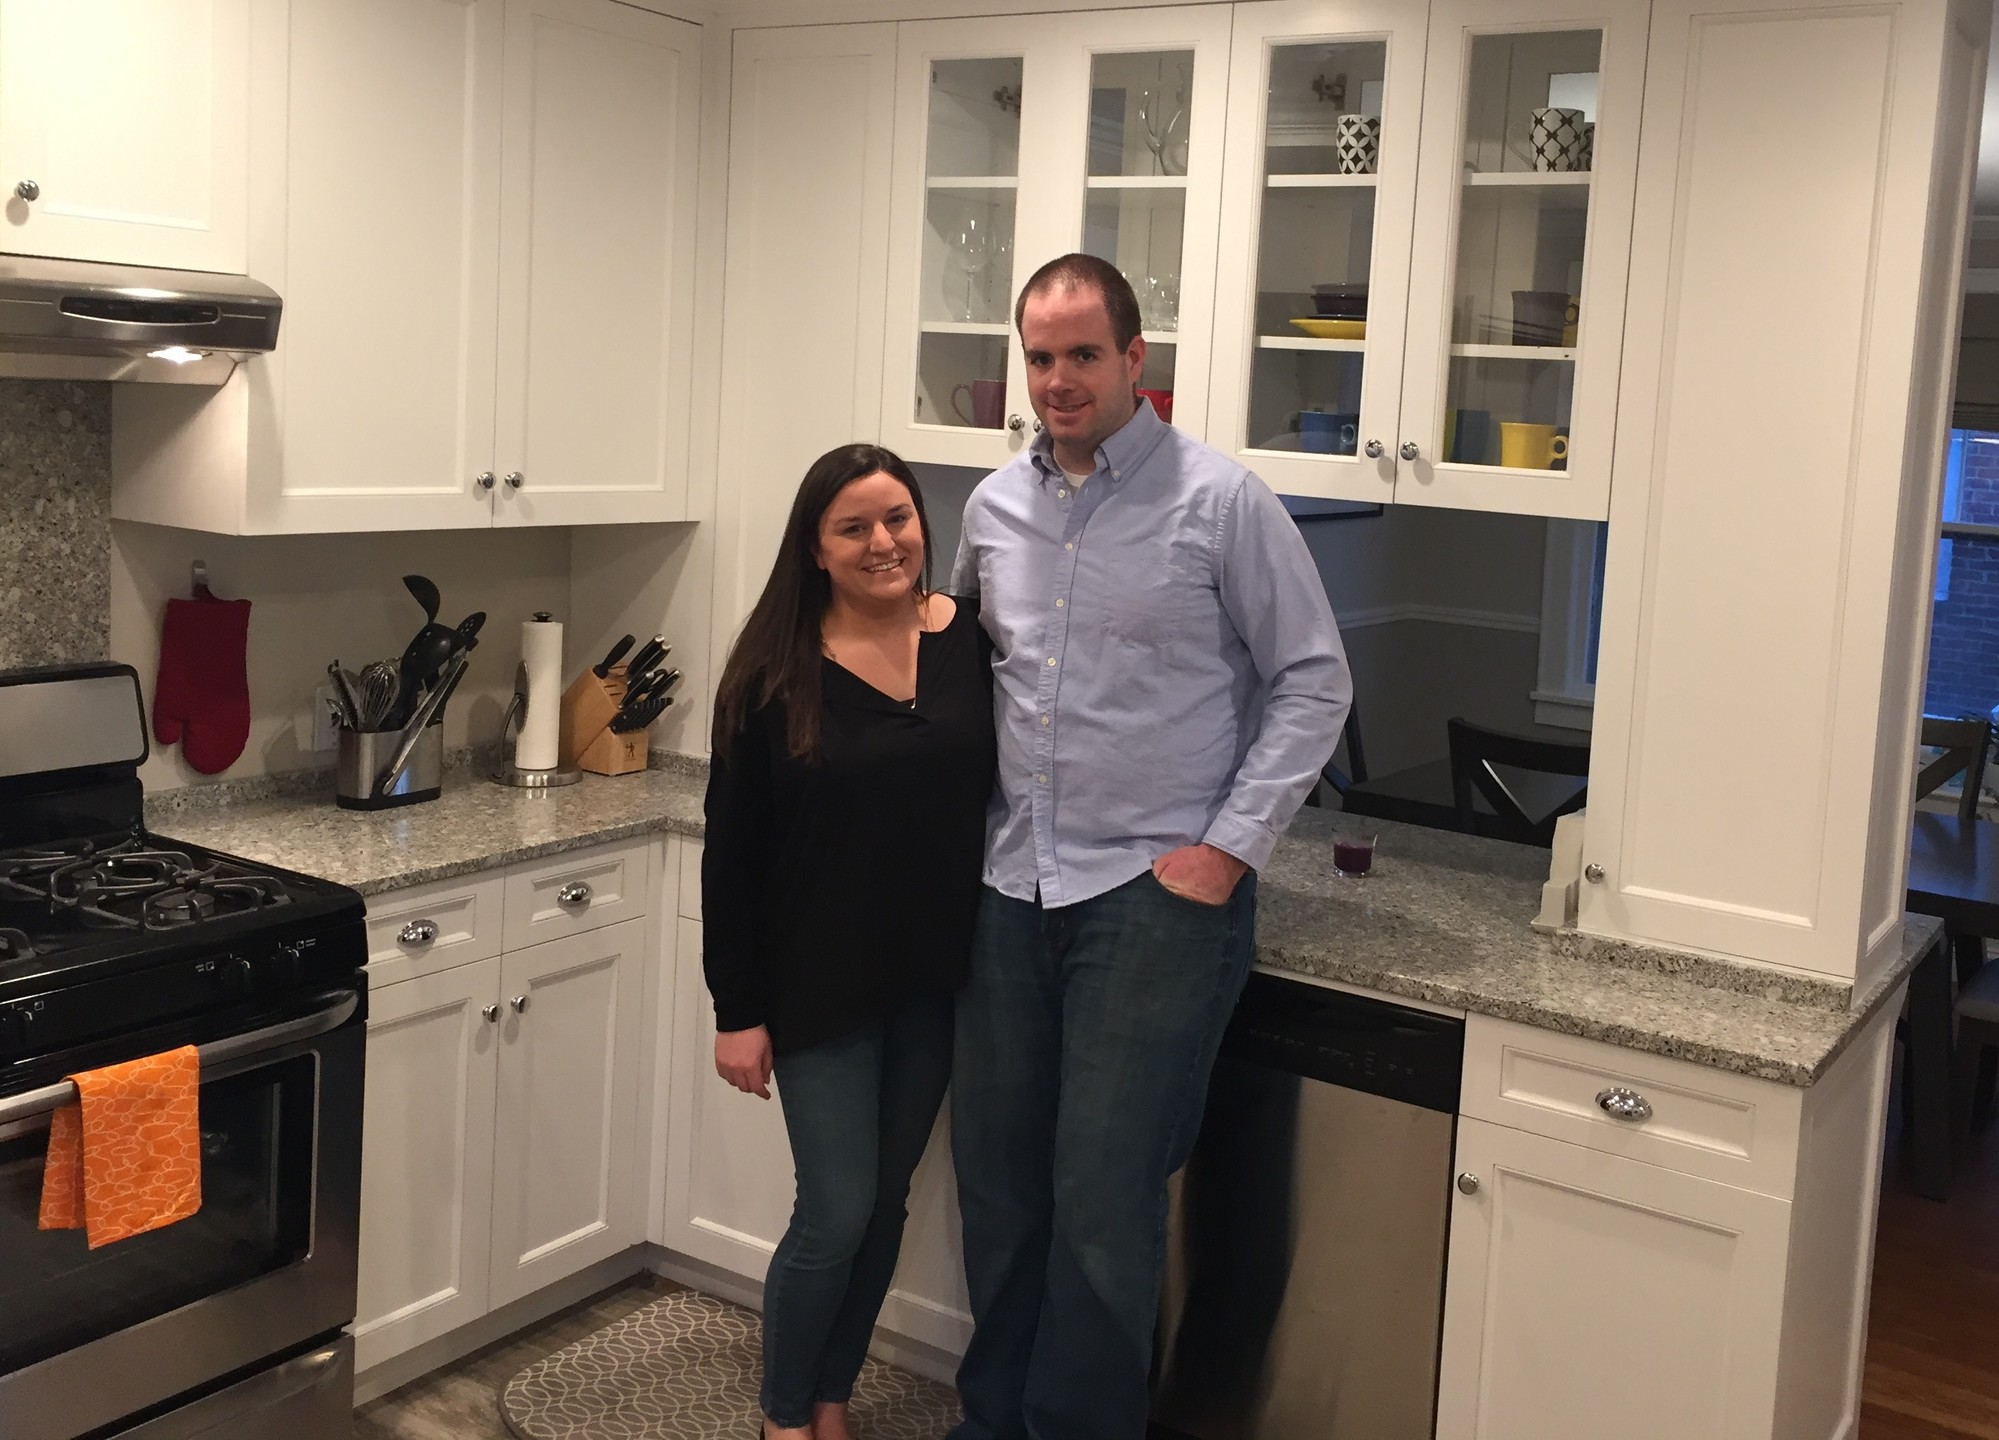 Jackie and Jack Cook in their redesigned kitchen, which will be featured in an episode of NBC’s “George to the Rescue” on April 9.